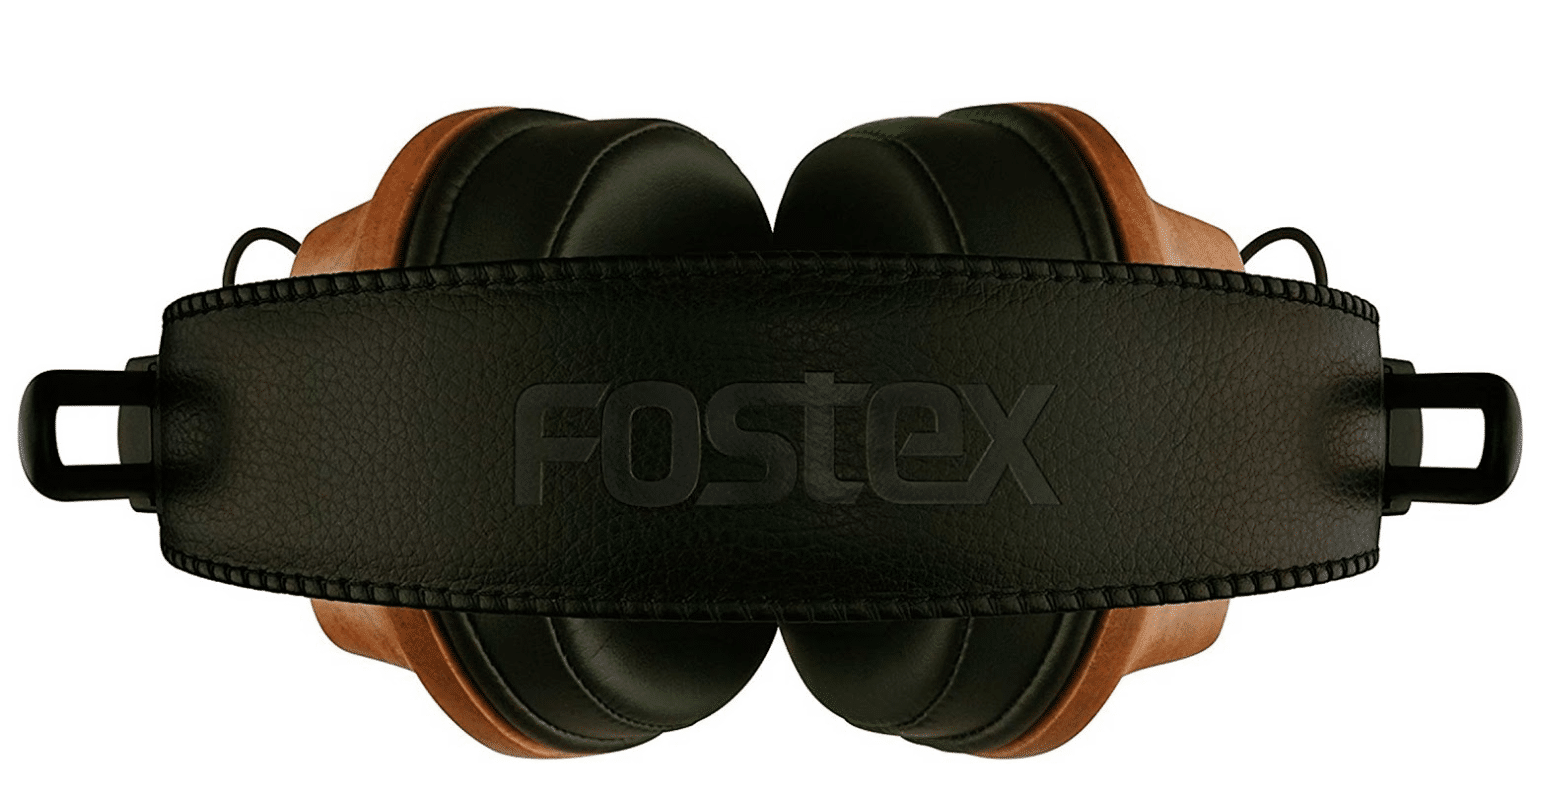 T60RP Regular Phase Stereo Headphones From Fostex